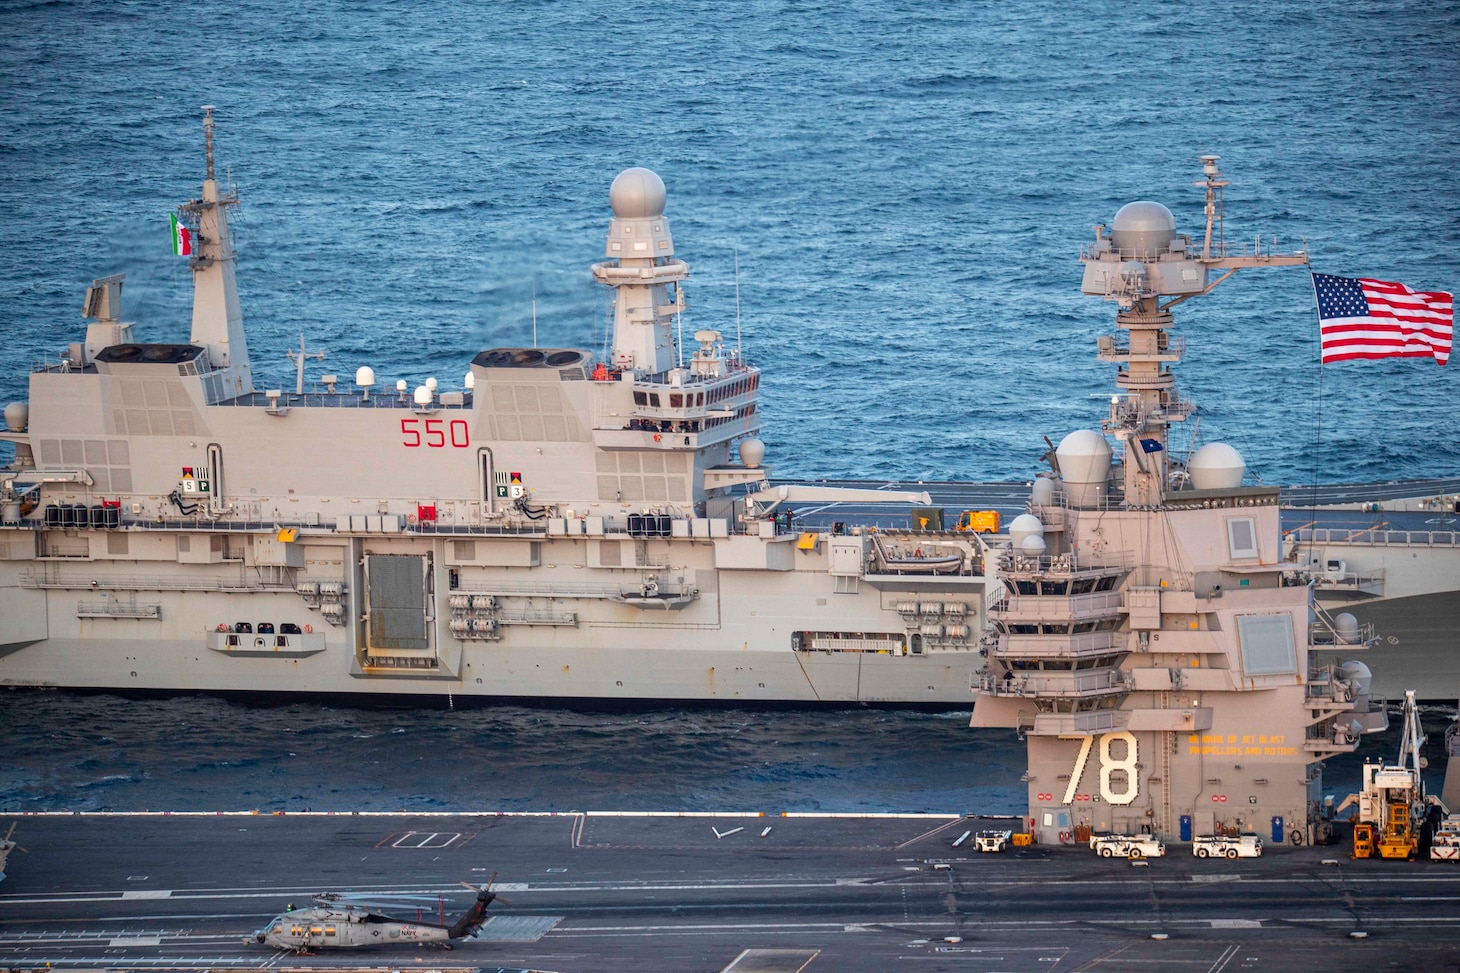 USS Gerald R. Ford (CVN 78) and the Italian navy aircraft carrier ITS Cavour (CVH 550) transit the Atlantic Ocean.